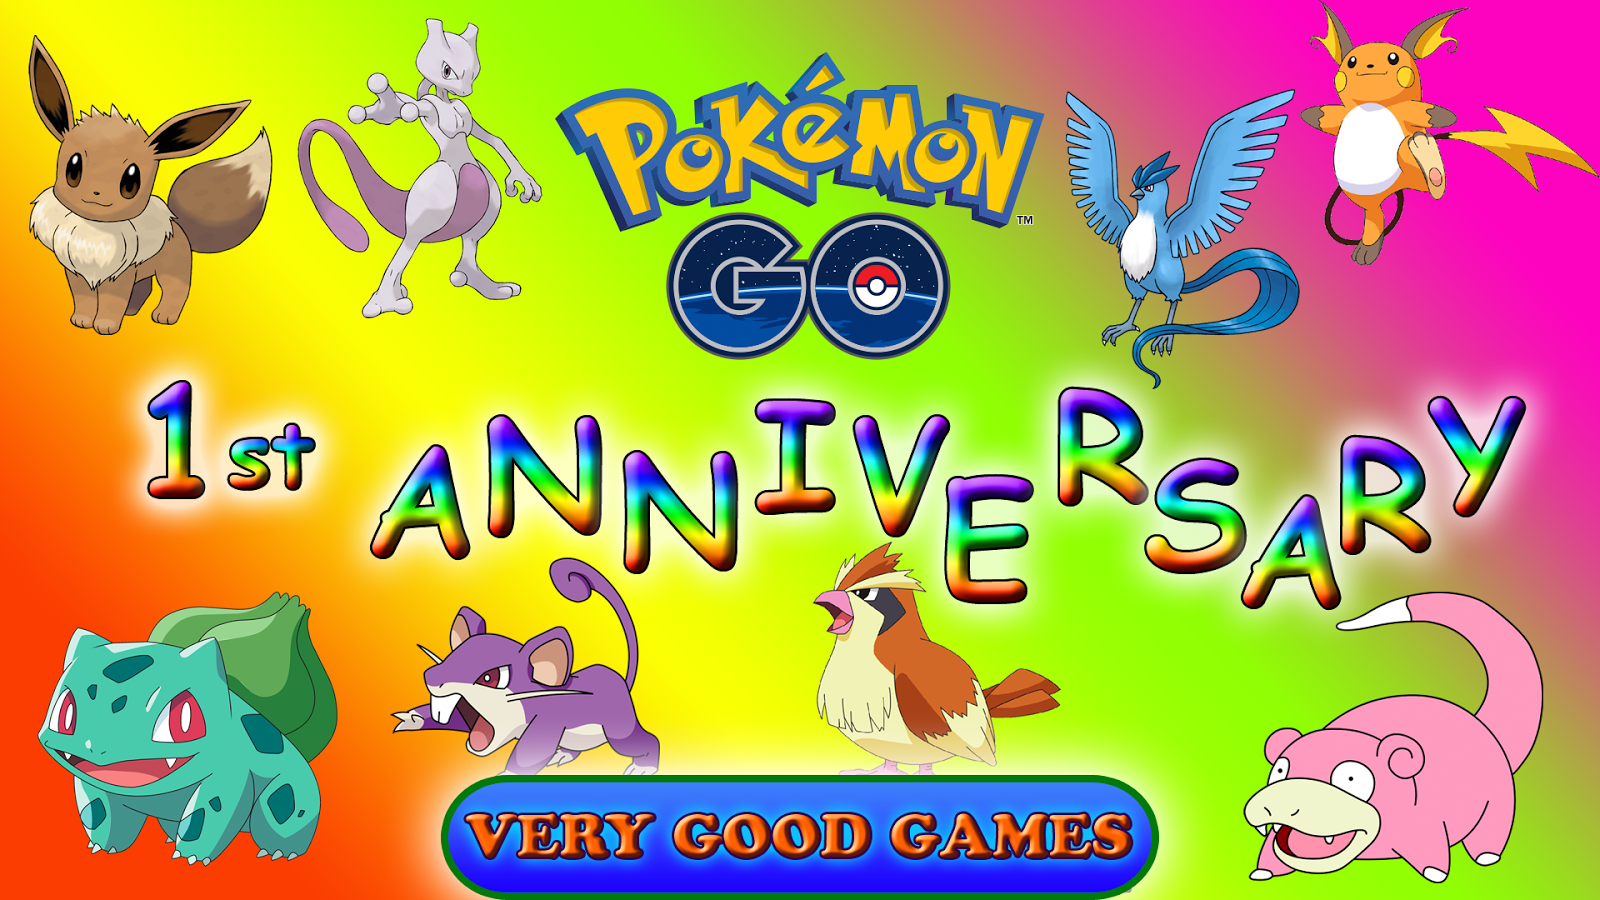 A banner for the newsabout event on first anniversary of the Pokemon Go game